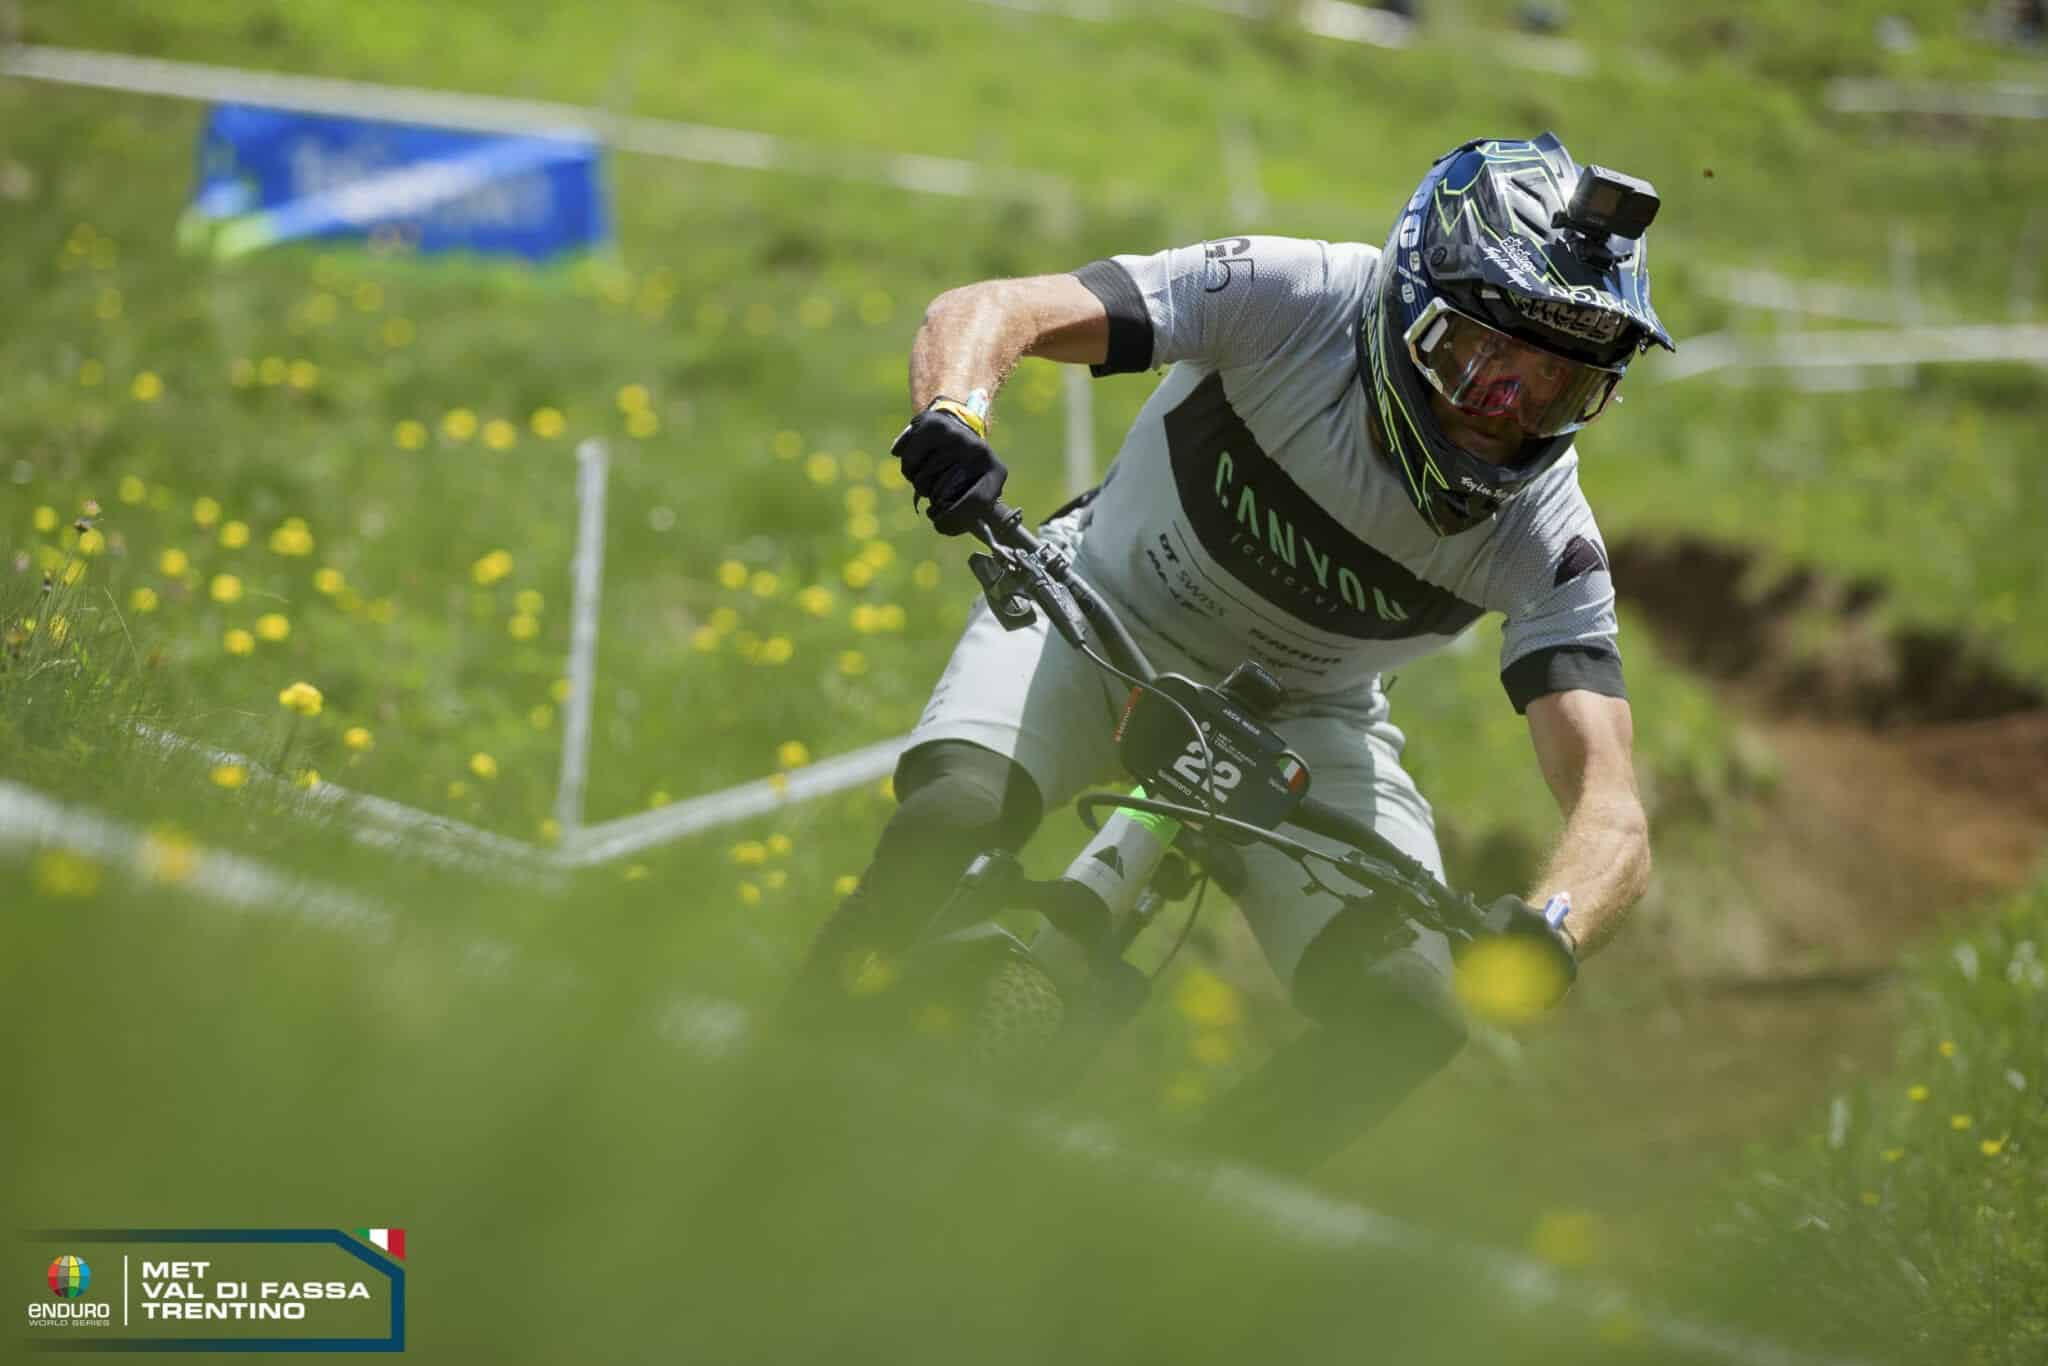 Tables Turned at Round 2 of the Enduro World Series in Italy